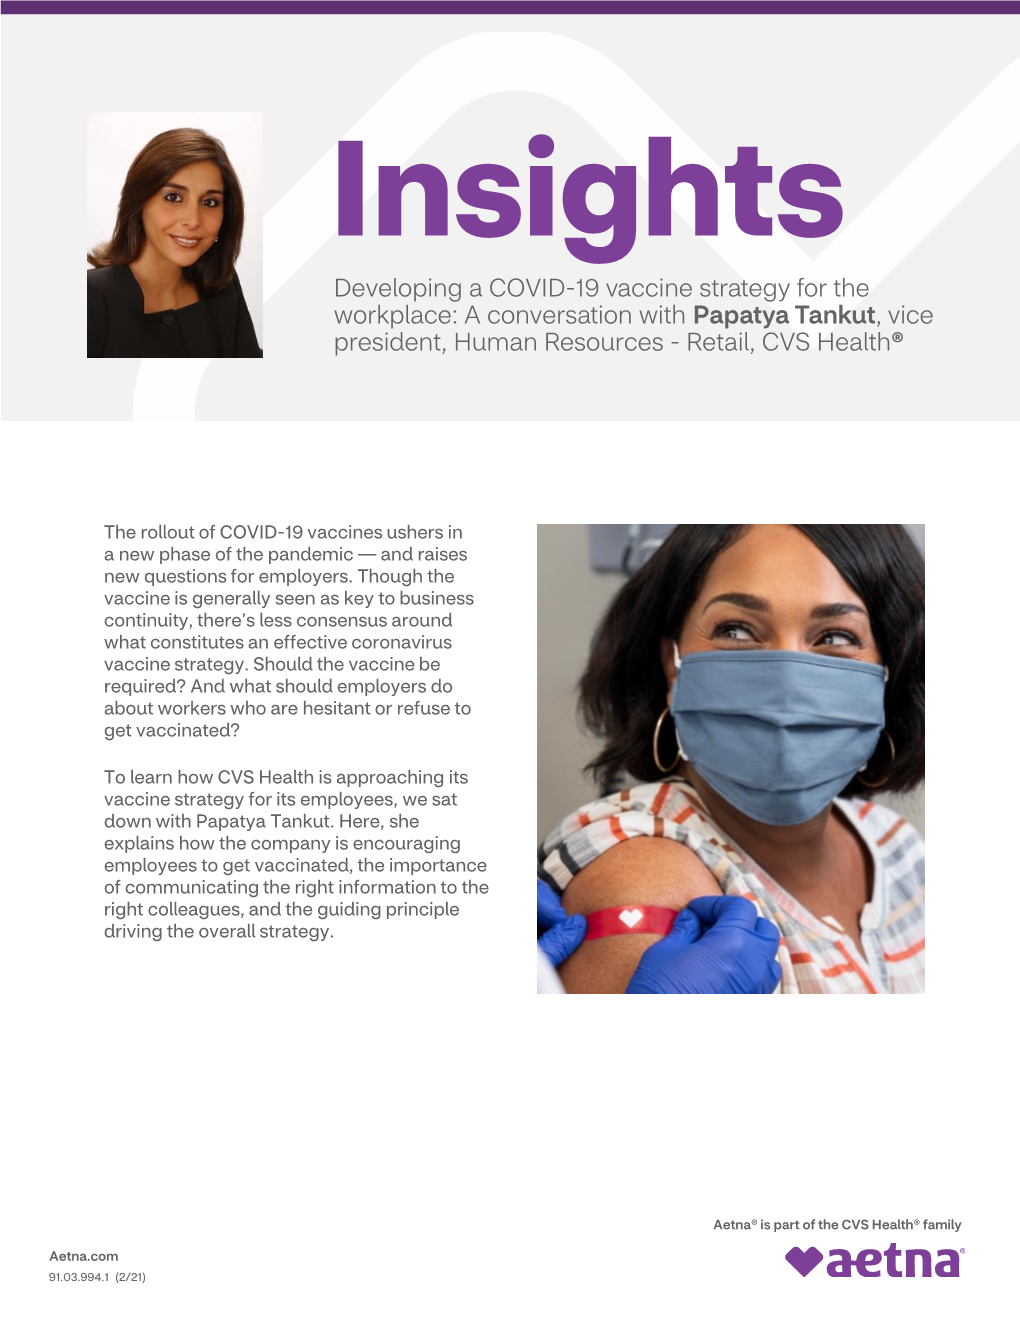 Developing a COVID-19 Vaccine Strategy for the Workplace: a Conversation with Papatya Tankut, Vice President, Human Resources - Retail, CVS Health®